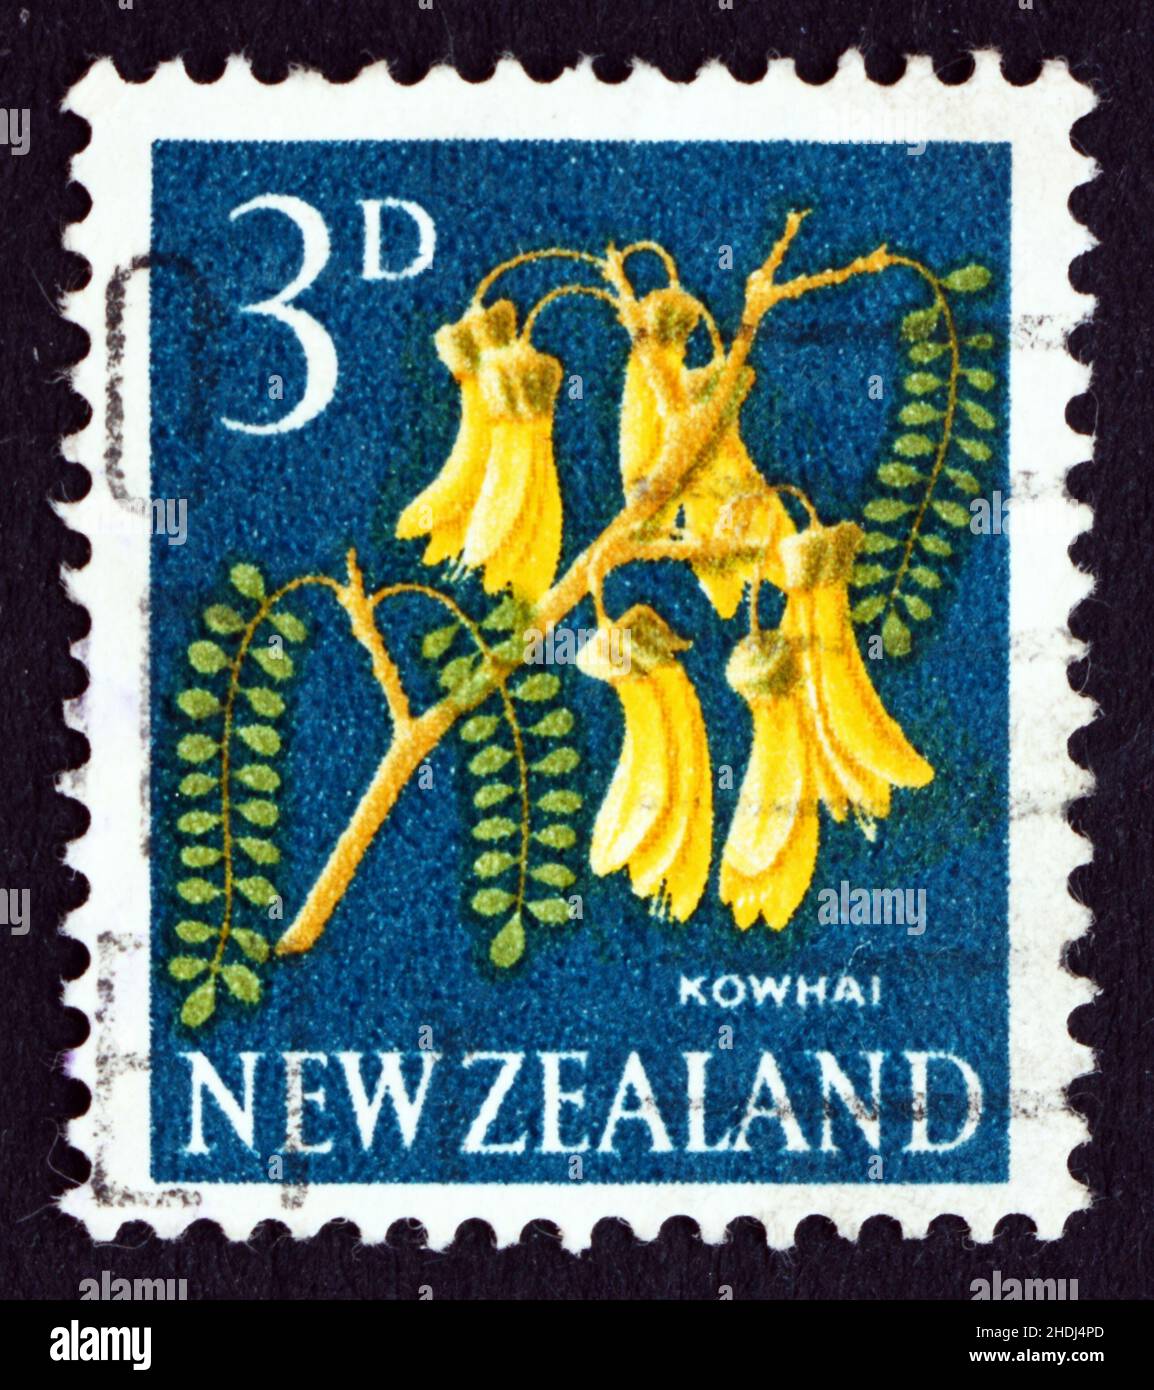 NEW ZEALAND - CIRCA 1961: a stamp printed in the New Zealand shows Kowhai Flower, Sophora, Legume Tree, circa 1961 Stock Photo